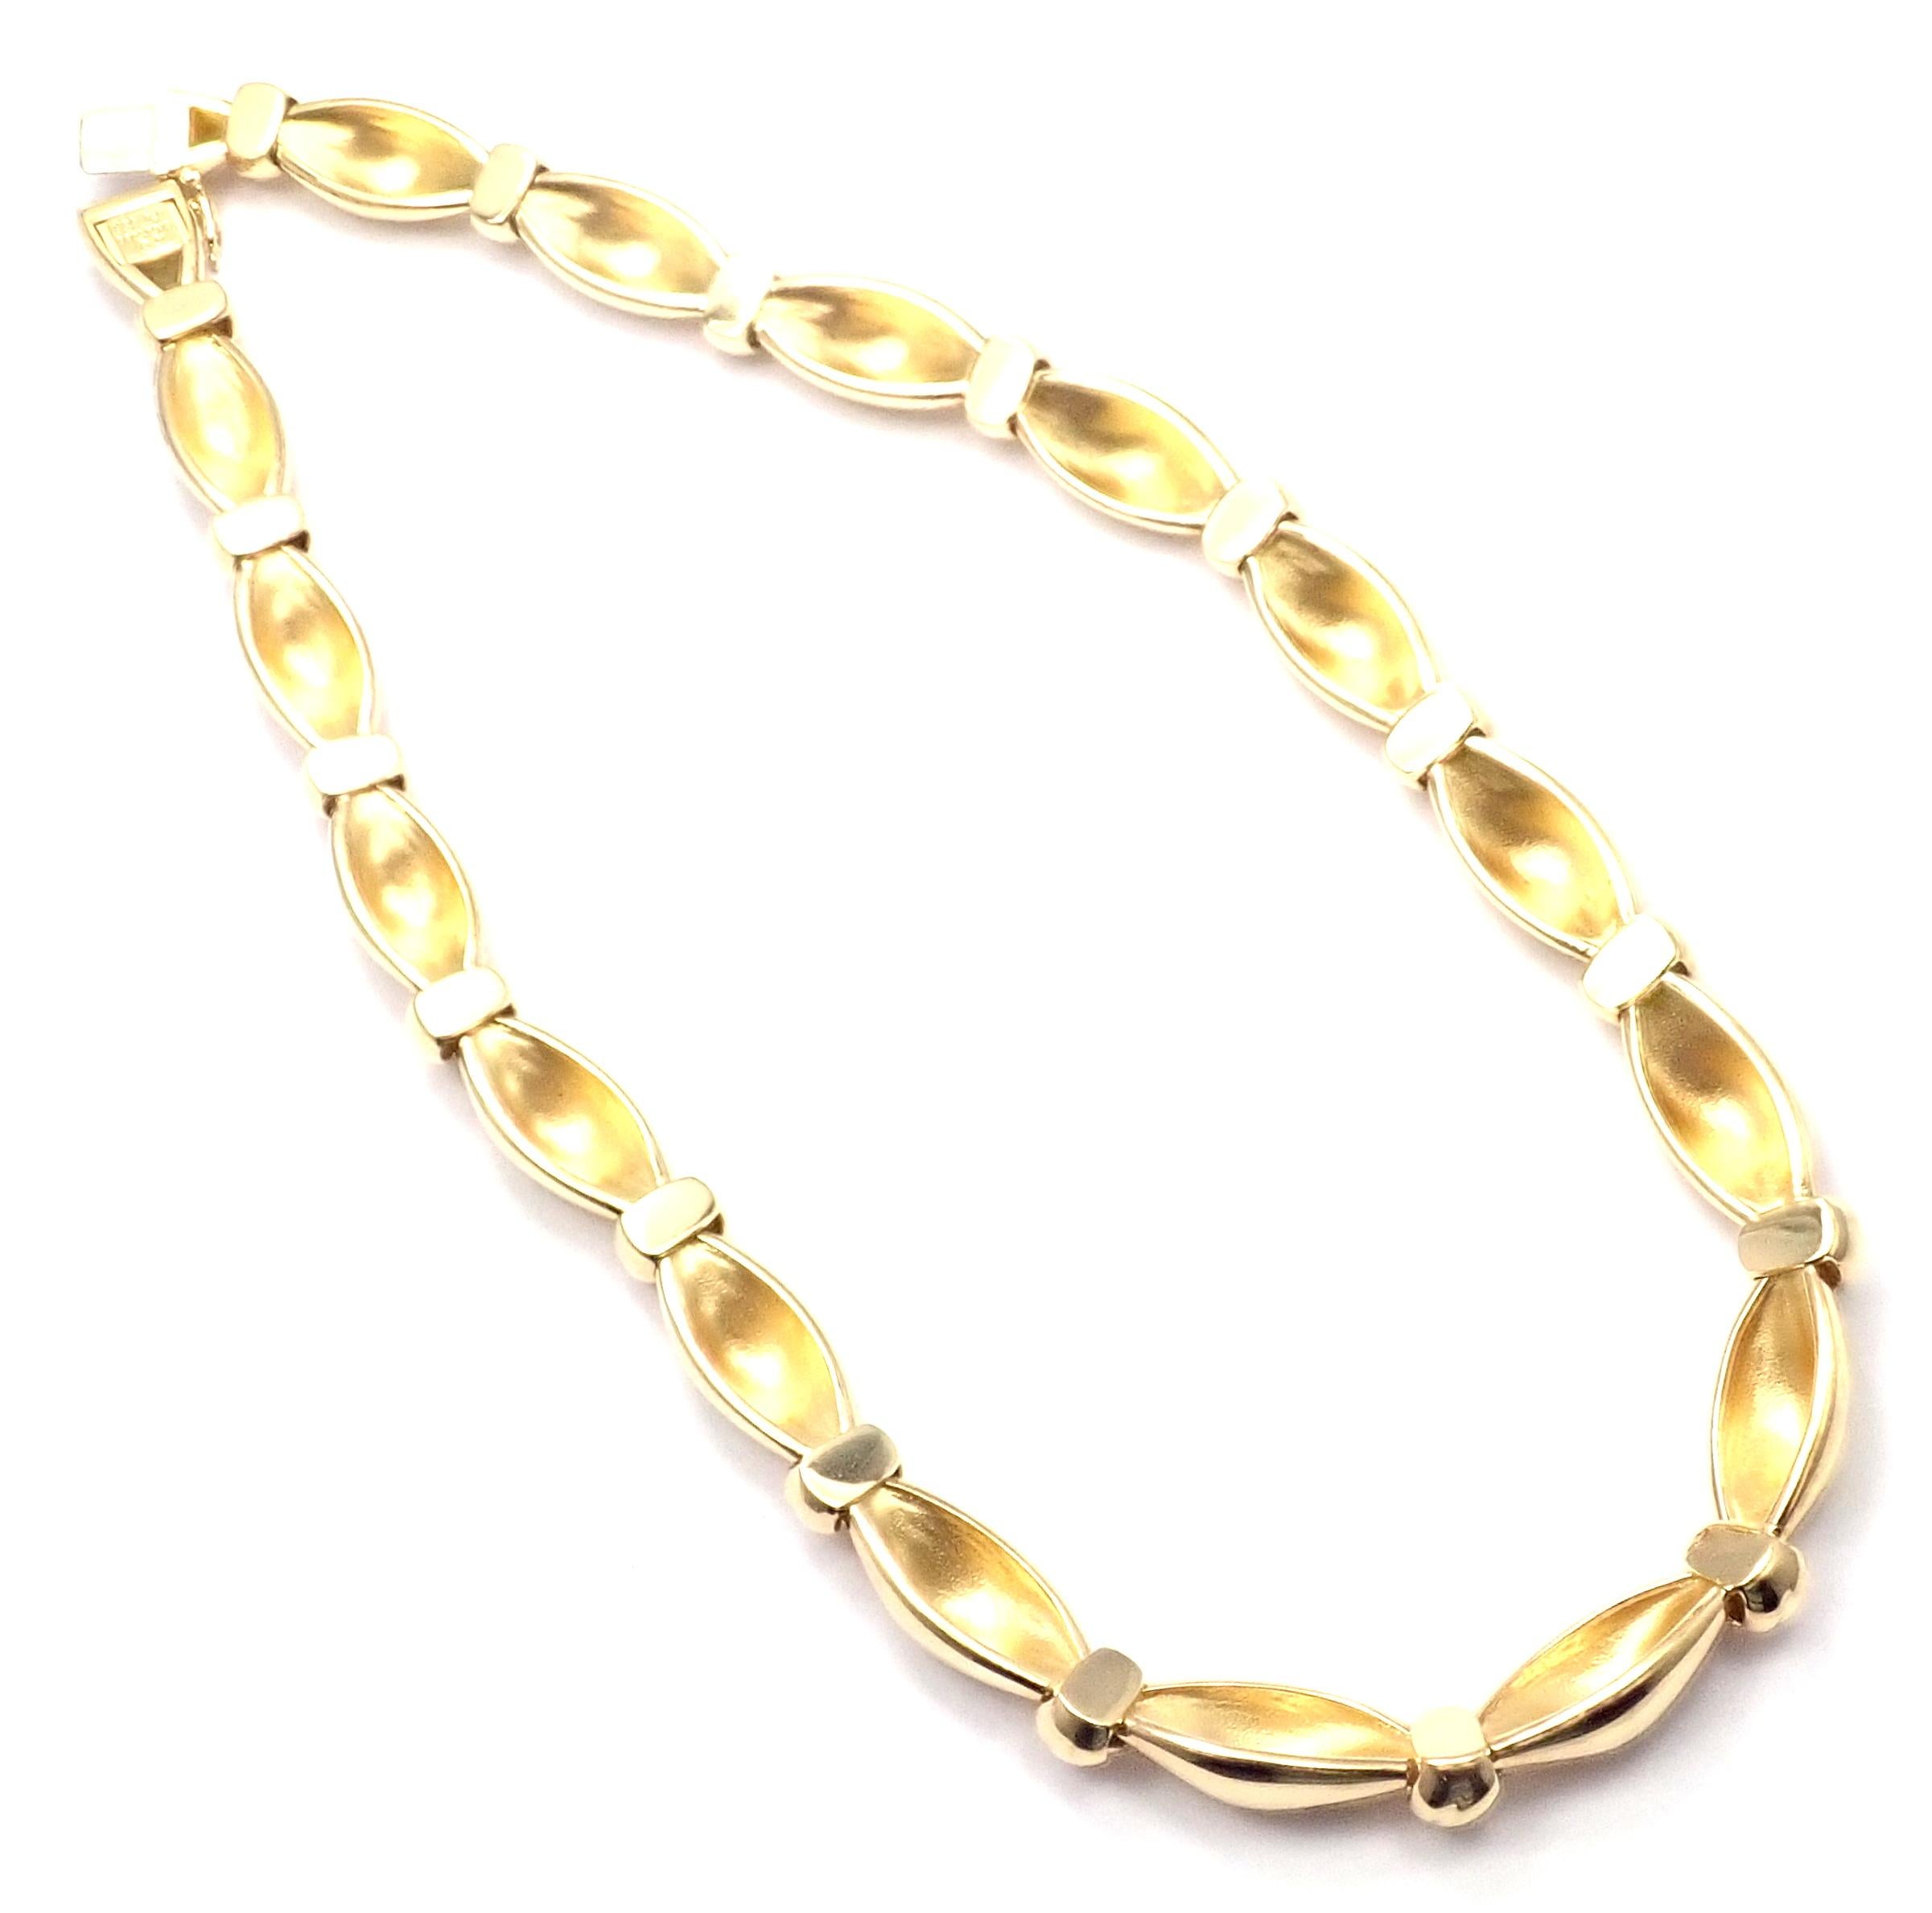 Van Cleef & Arpels Knotted Link Yellow Gold Choker Necklace In Excellent Condition For Sale In Holland, PA